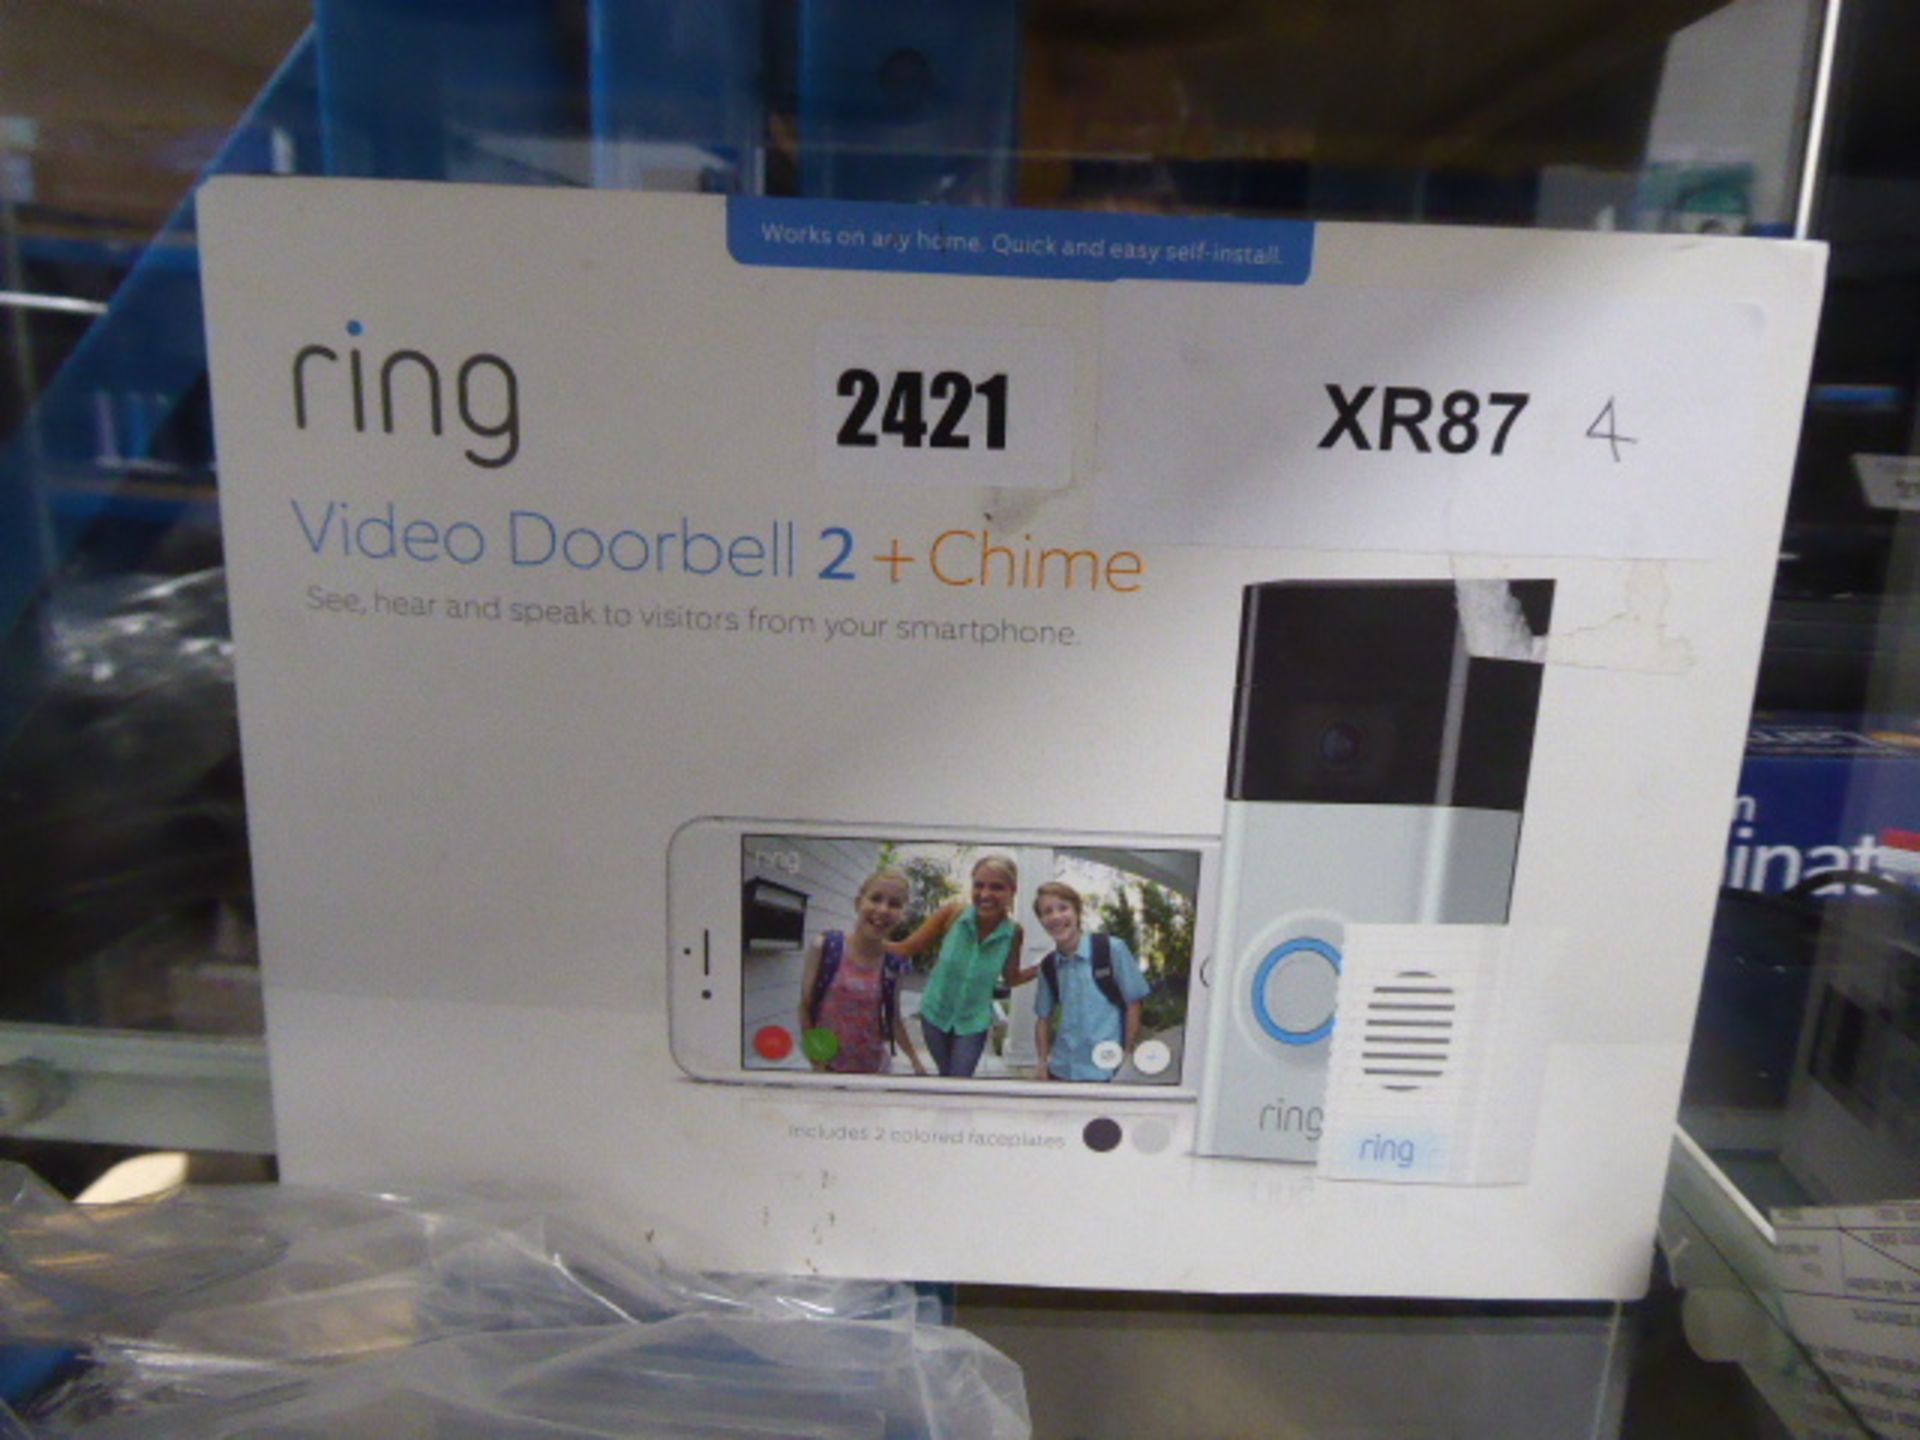 Ring video doorbell 1 with chime (in wrong box)